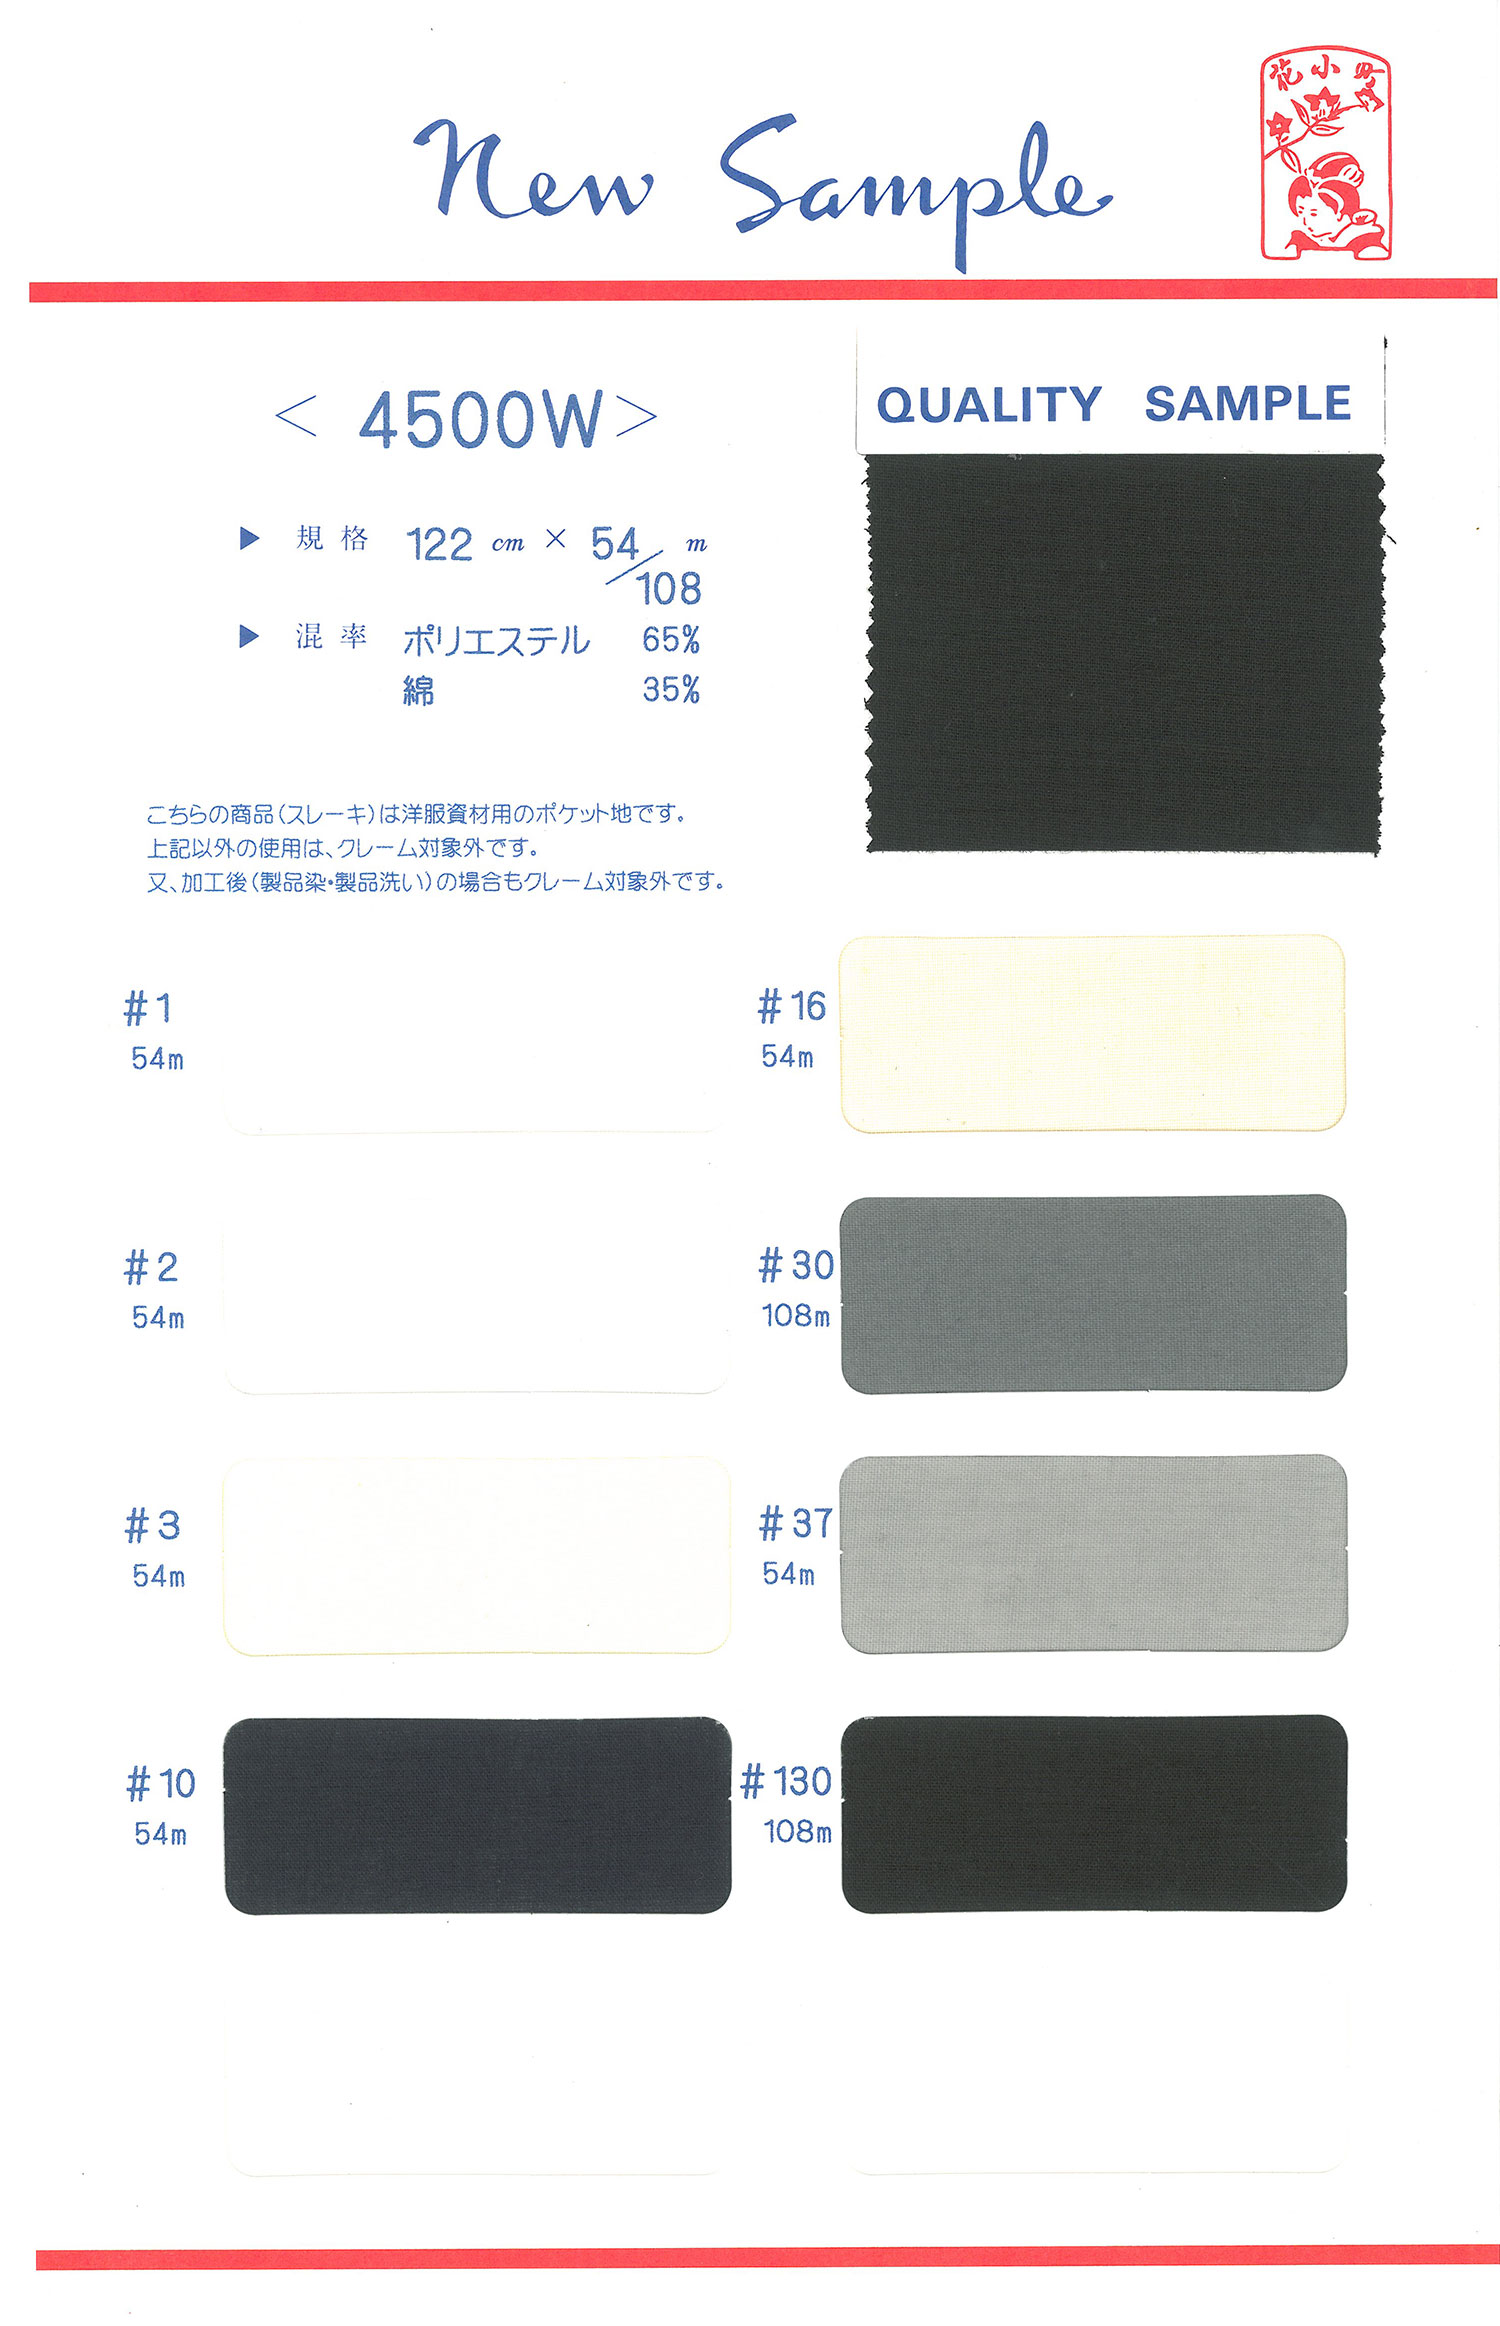 4500W Polyester / Cotton Pocket Lining For Pockets Maruhachi